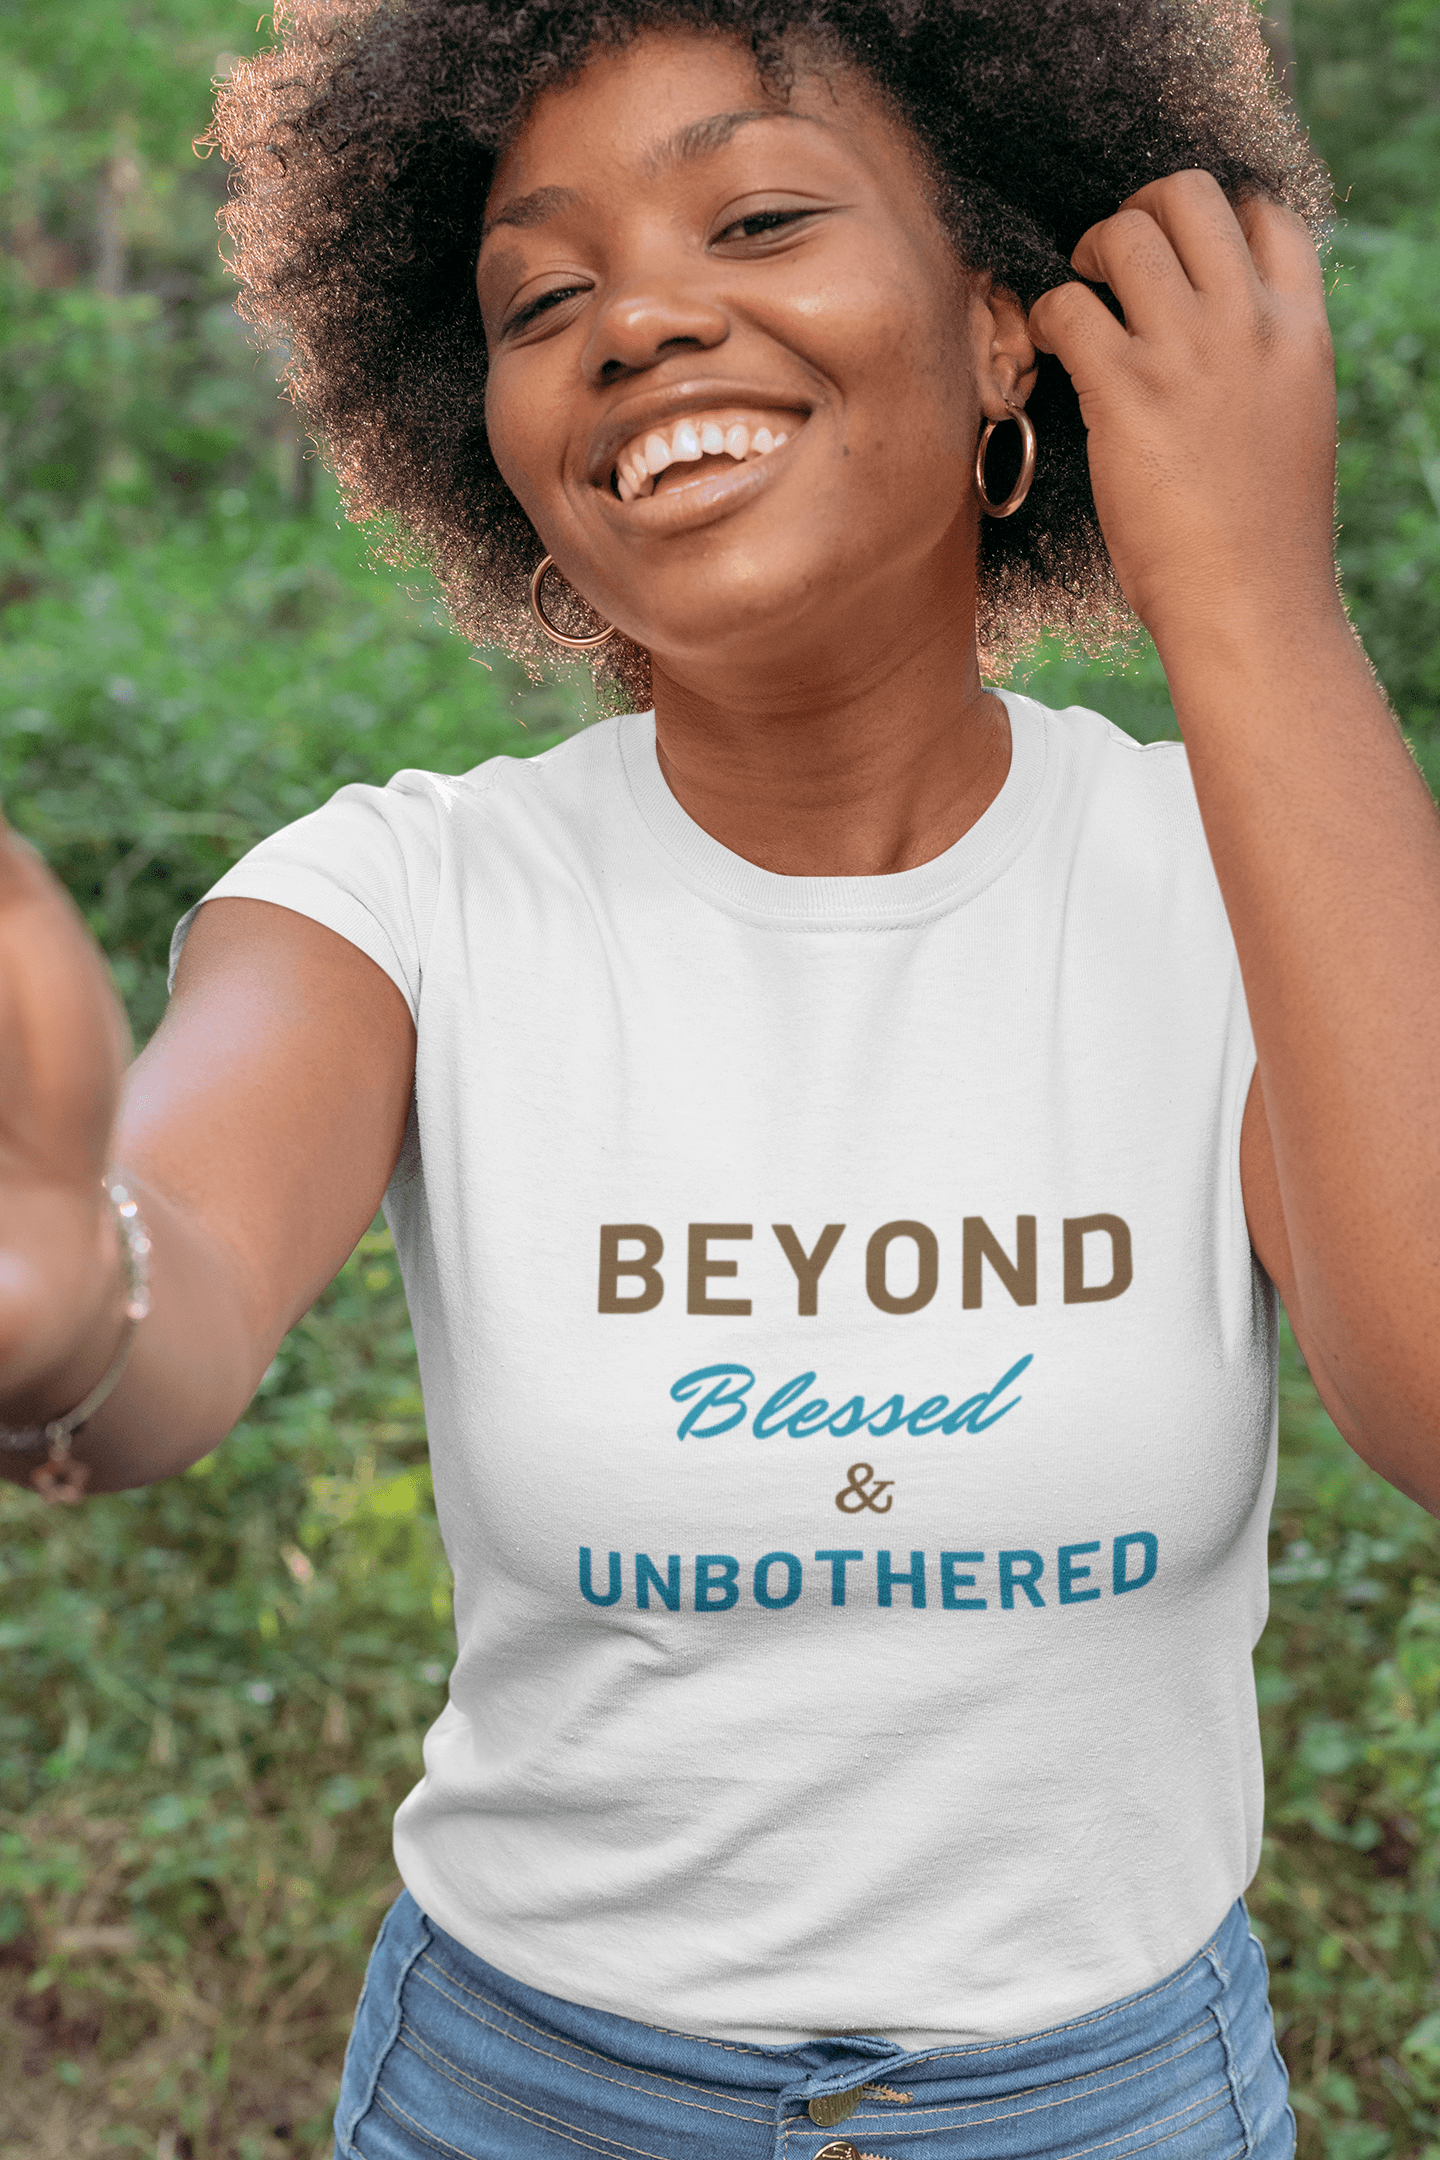 Beyond Blessed and Unbothered Tee - Sharp Tact Kreativ | Tees & Gifts with Encouraging Messages to Brighten Your Day with a Bit of Wit